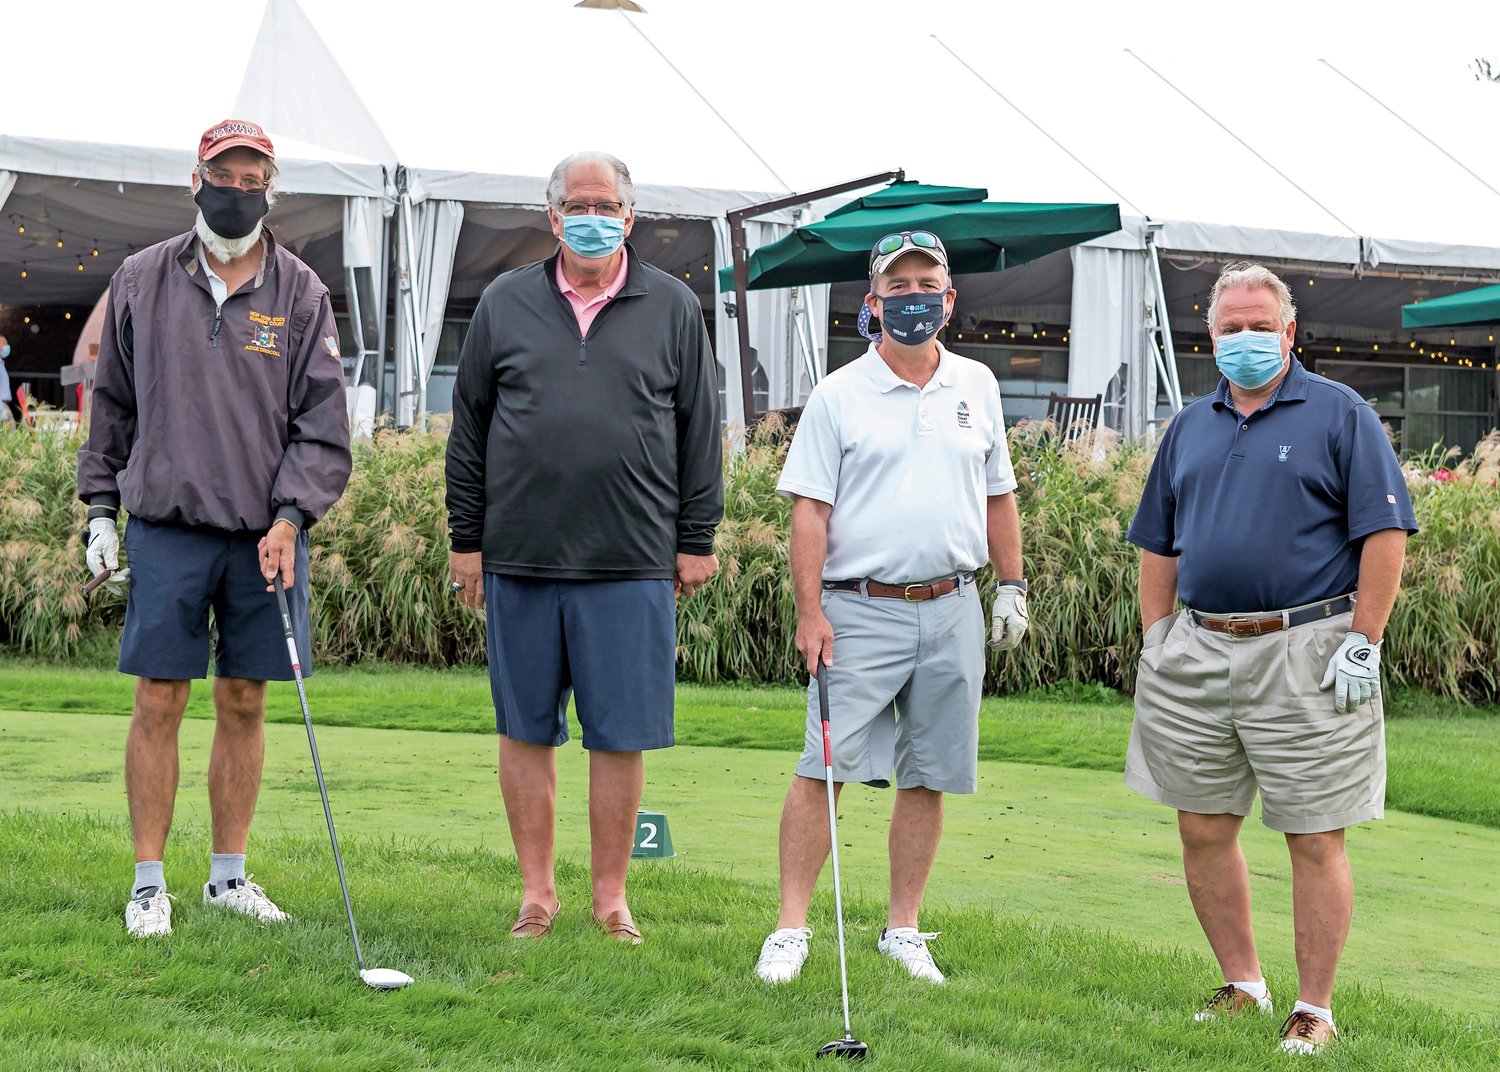 Timothy Driscoll, Justice of the Supreme Court of the State of New York, far left; Tony Cancellieri, vice chairman of MSSN’s board of directors; Joe Calderone, MSSN’s senior vice president of corporate communications; and Michael Sapraicone, president and CEO of Squad Security, enjoyed the hospital’s 36th annual golf outing.